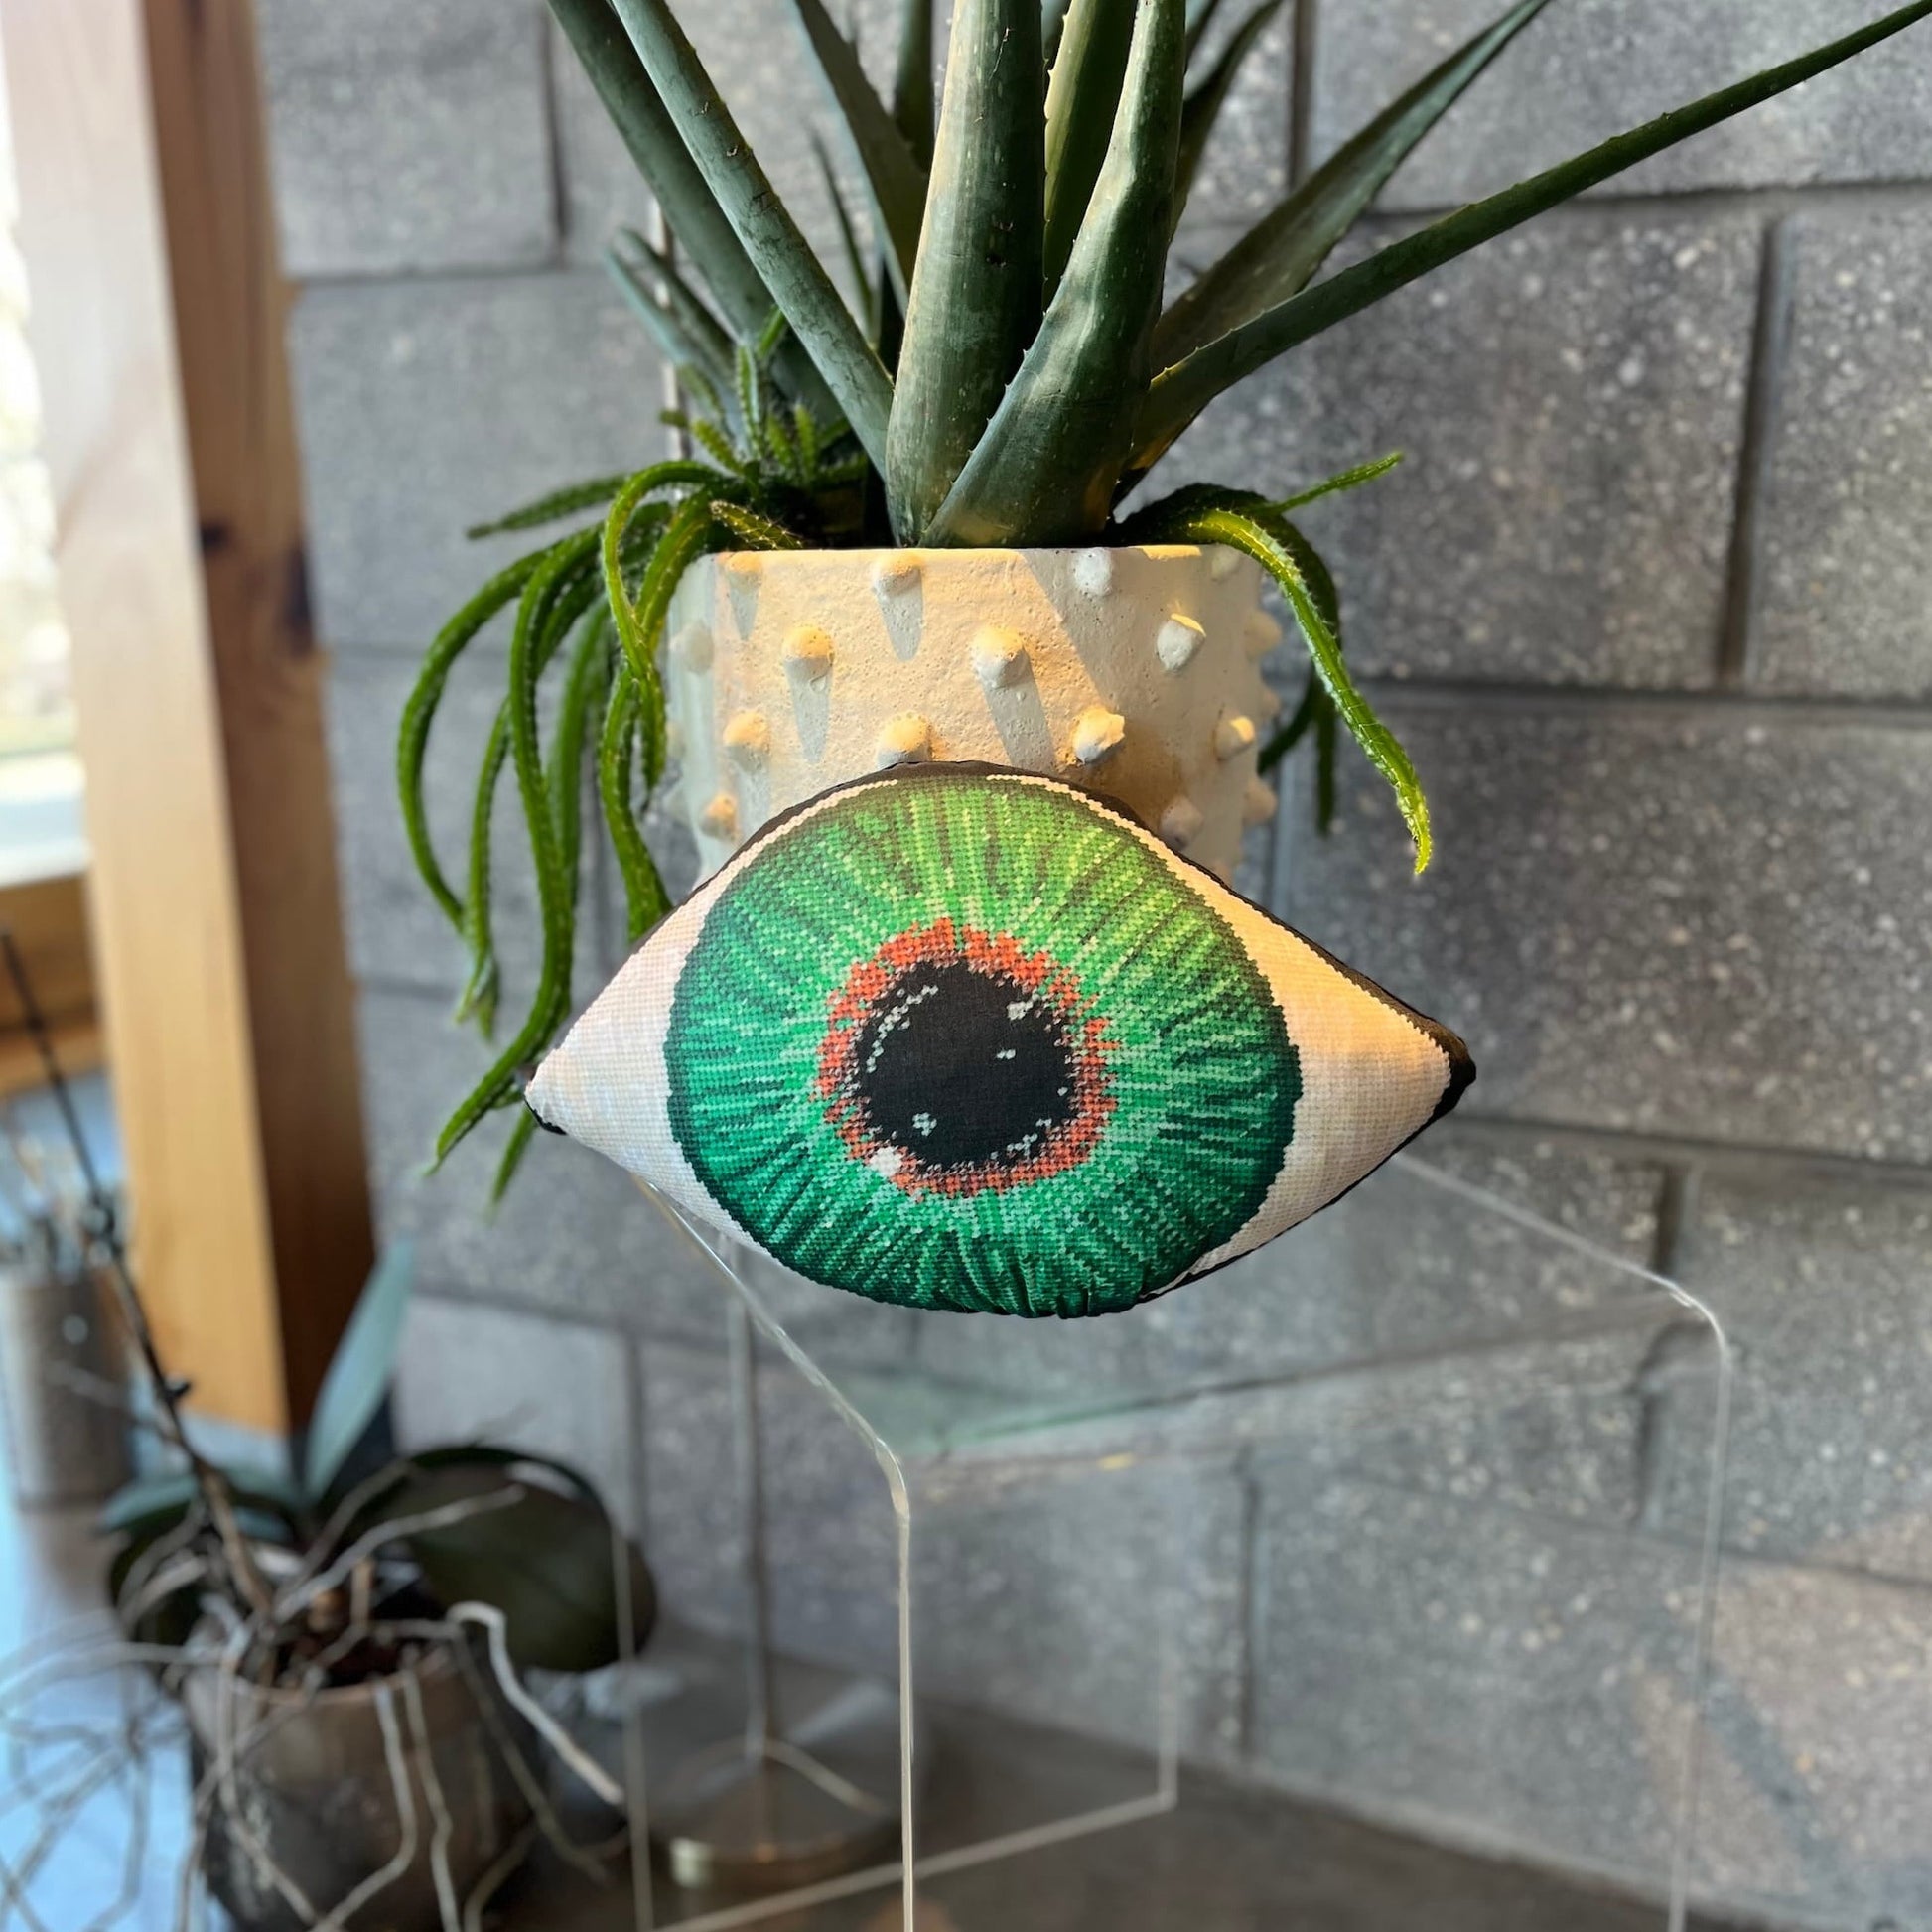 green eye sculpted pillow has gold at center, gradually turning to a dark green- very detailed